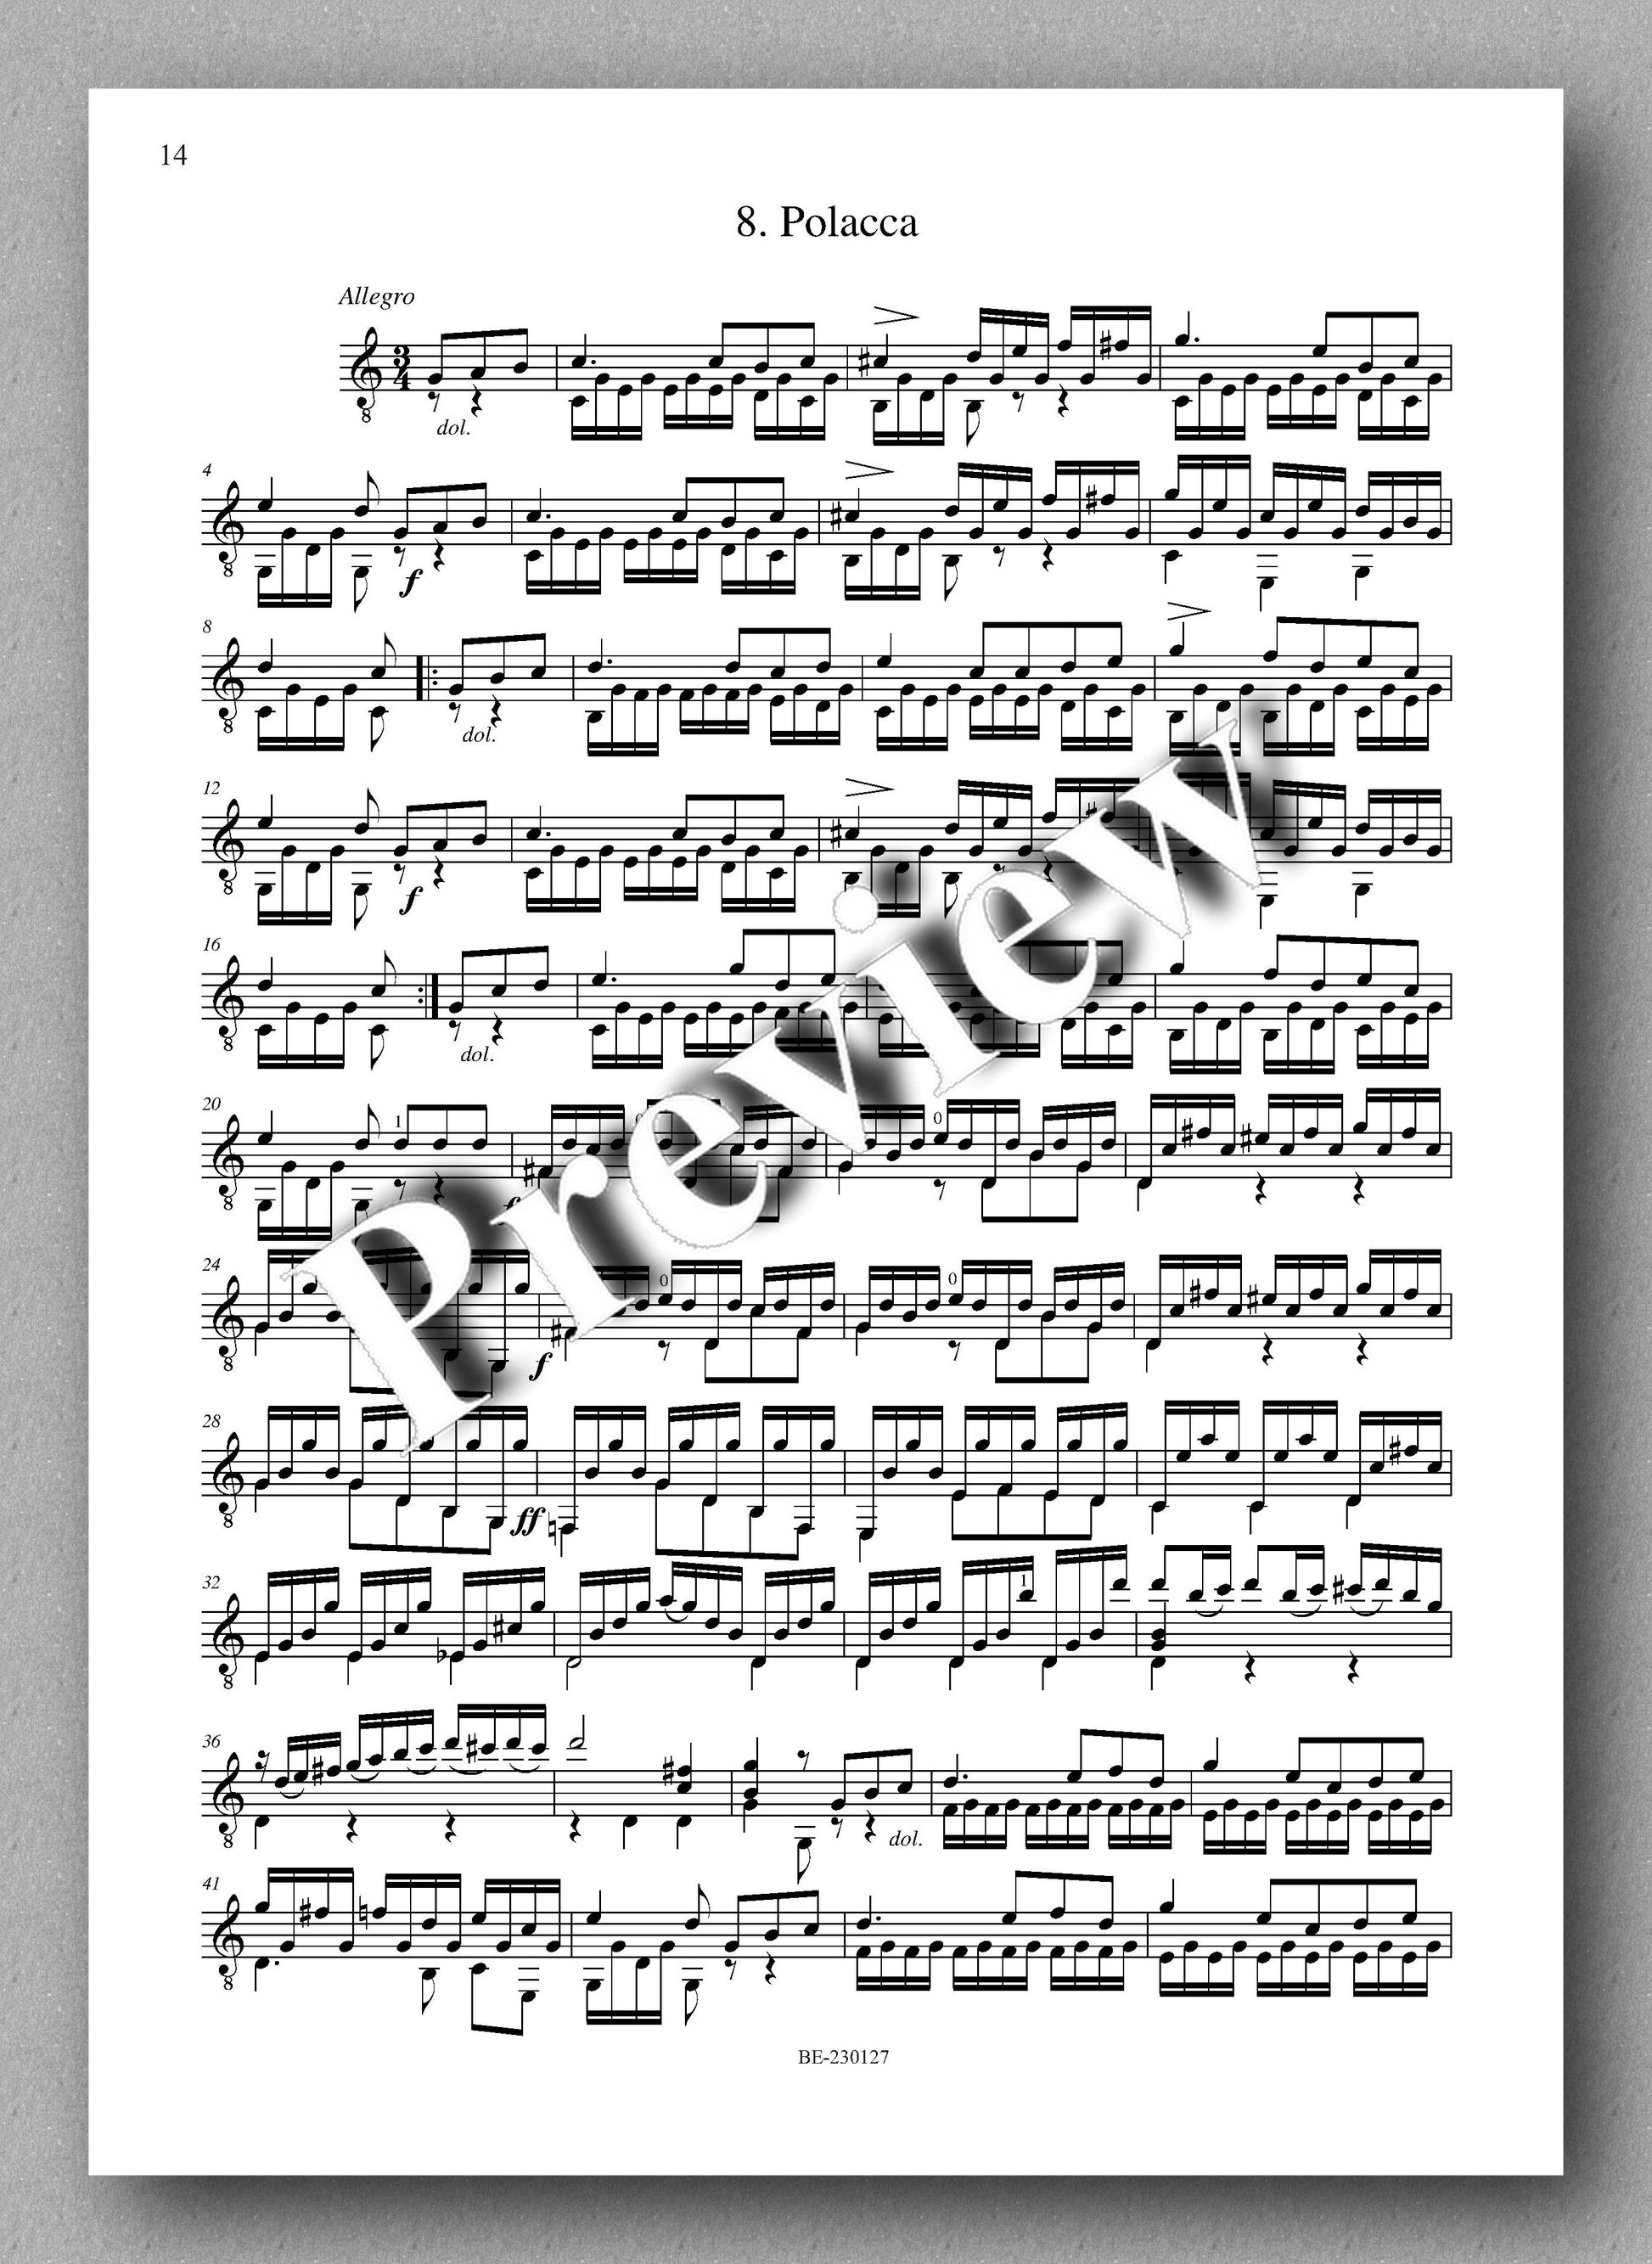 Molino, Collected Works for Guitar Solo, Vol. 39 - preview of the music score 3